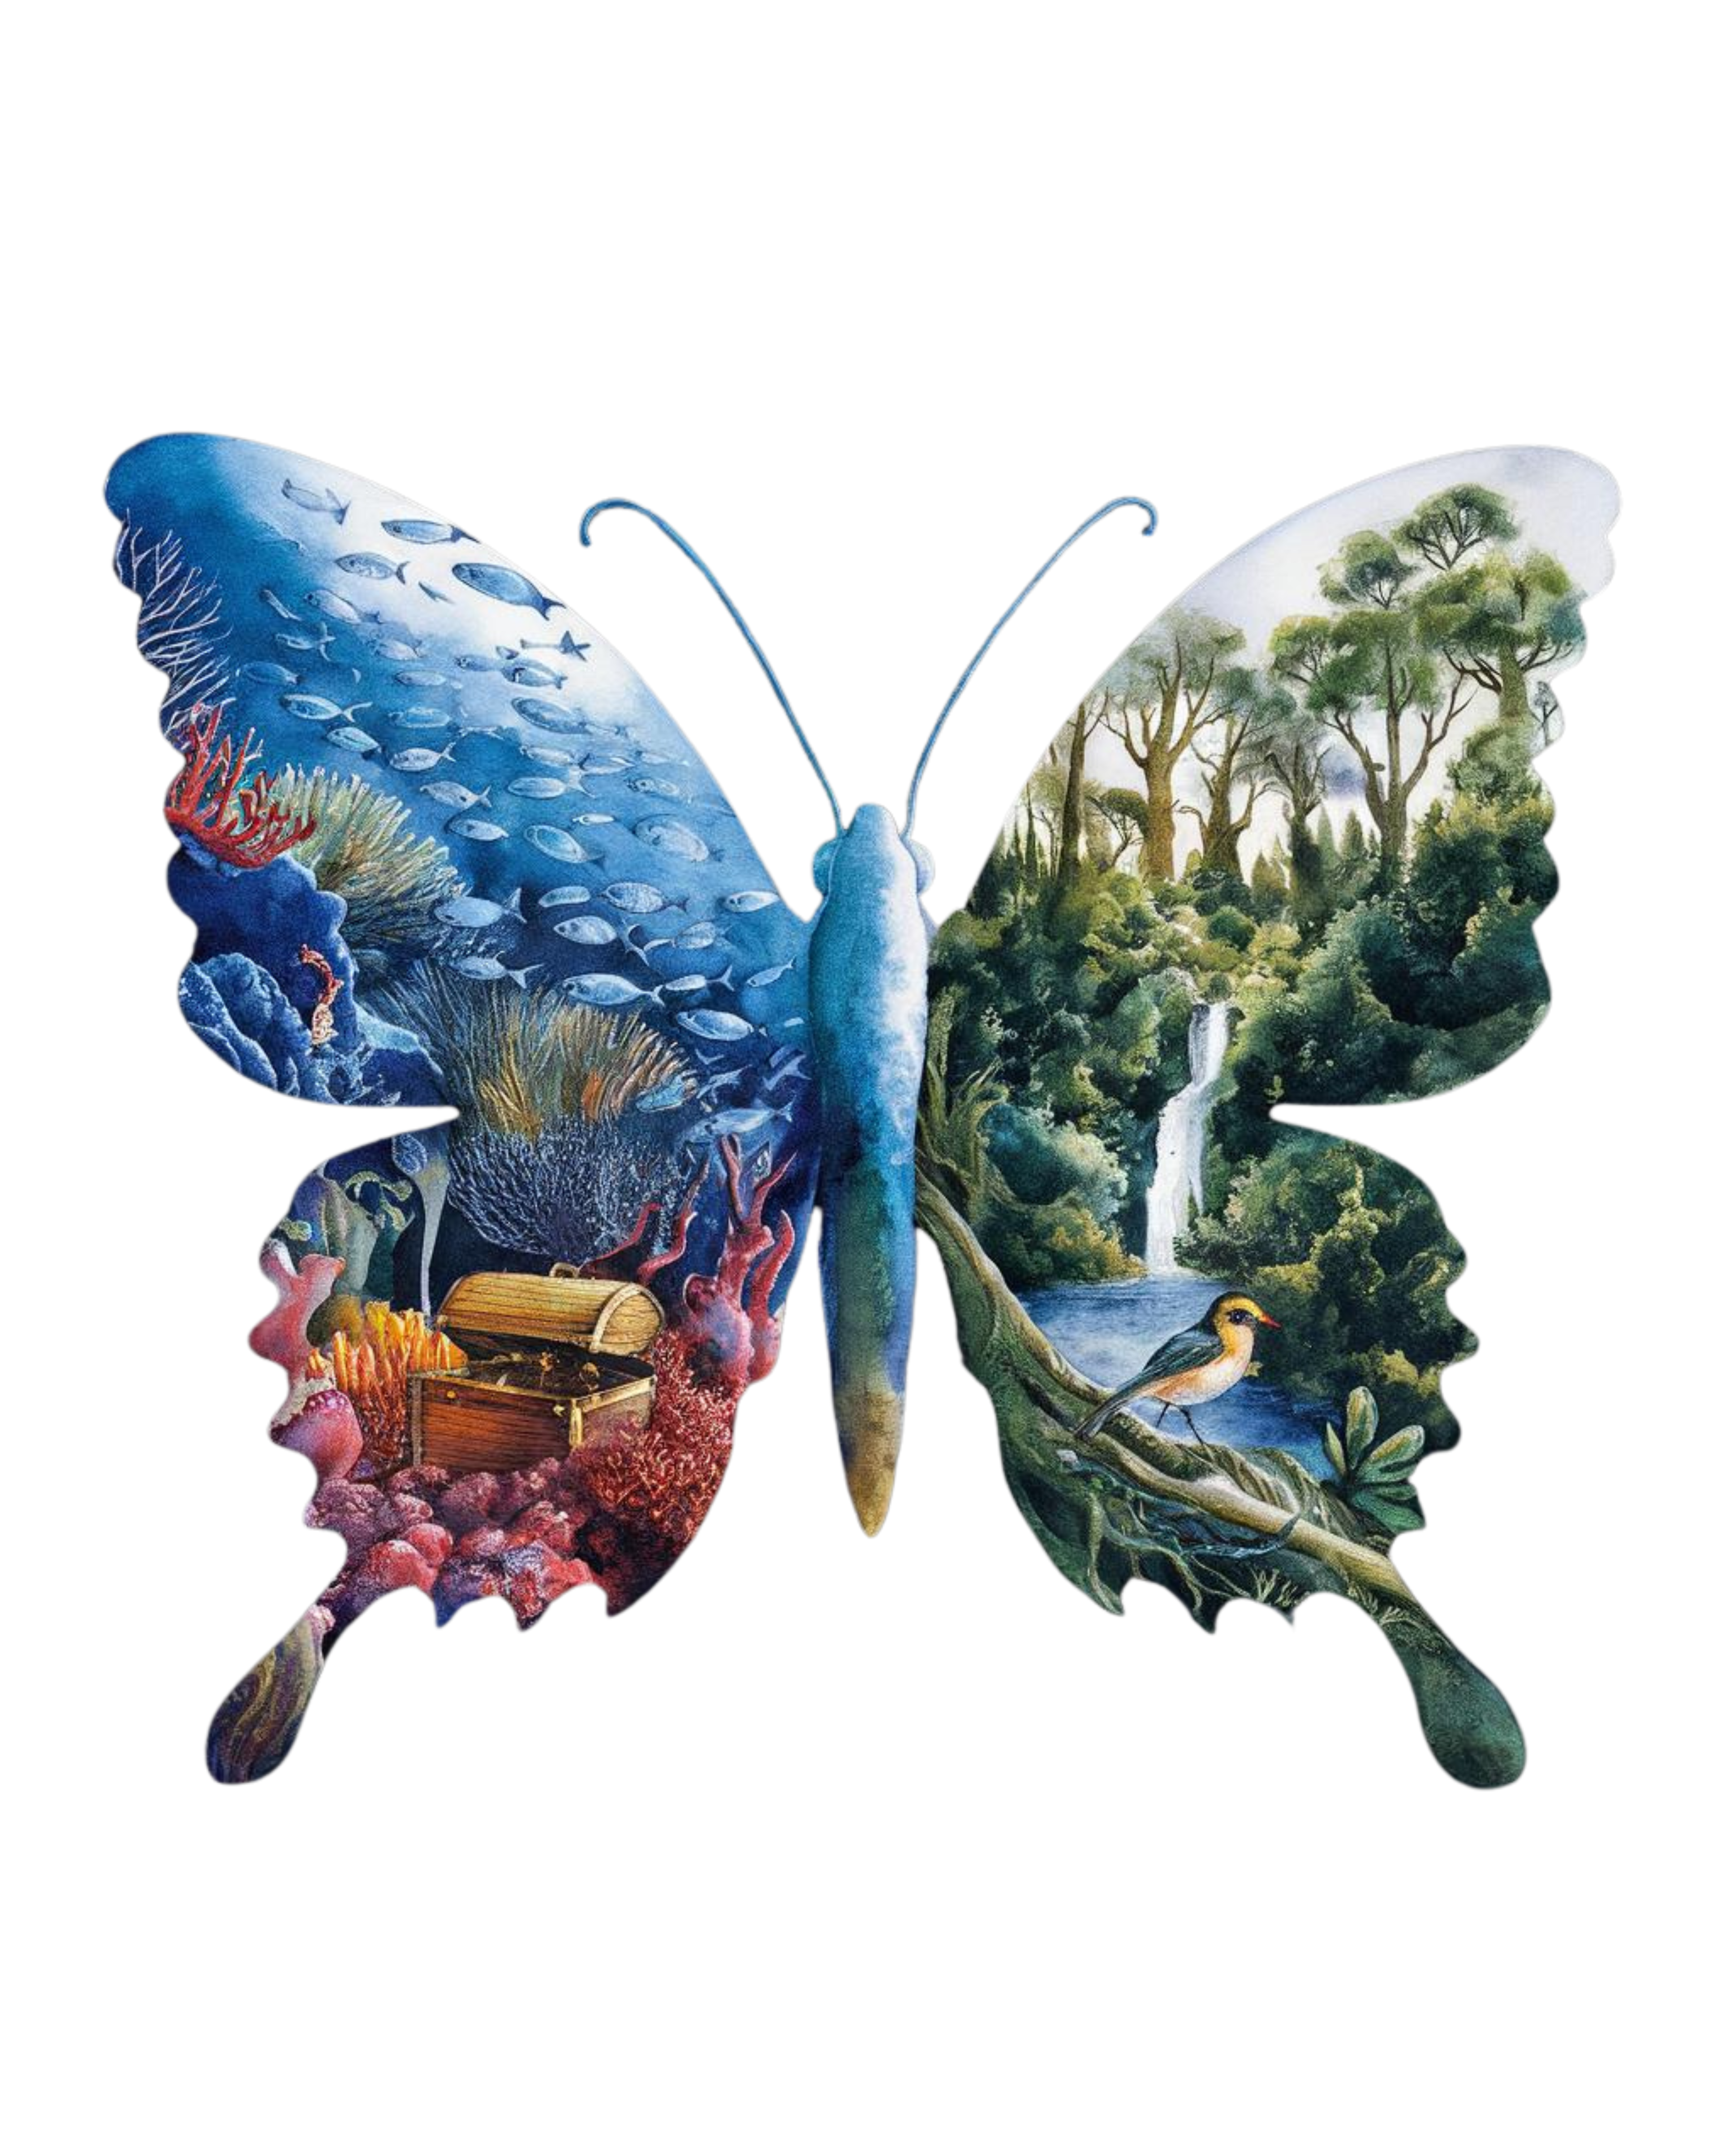 a butterfly with different images on wings